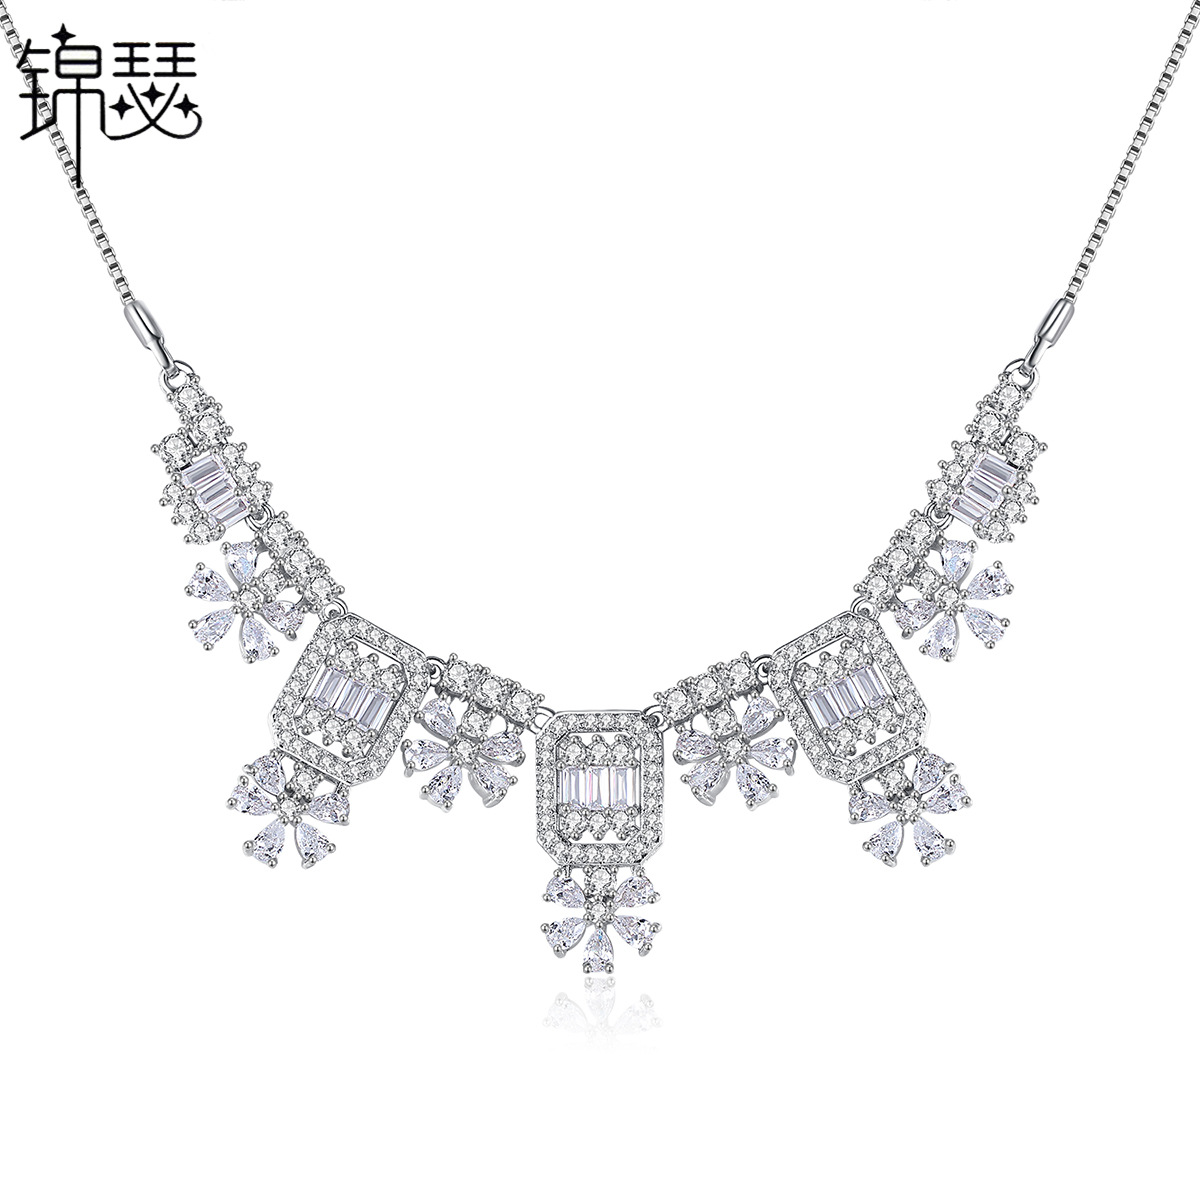 Commuting chain accessories European style necklace